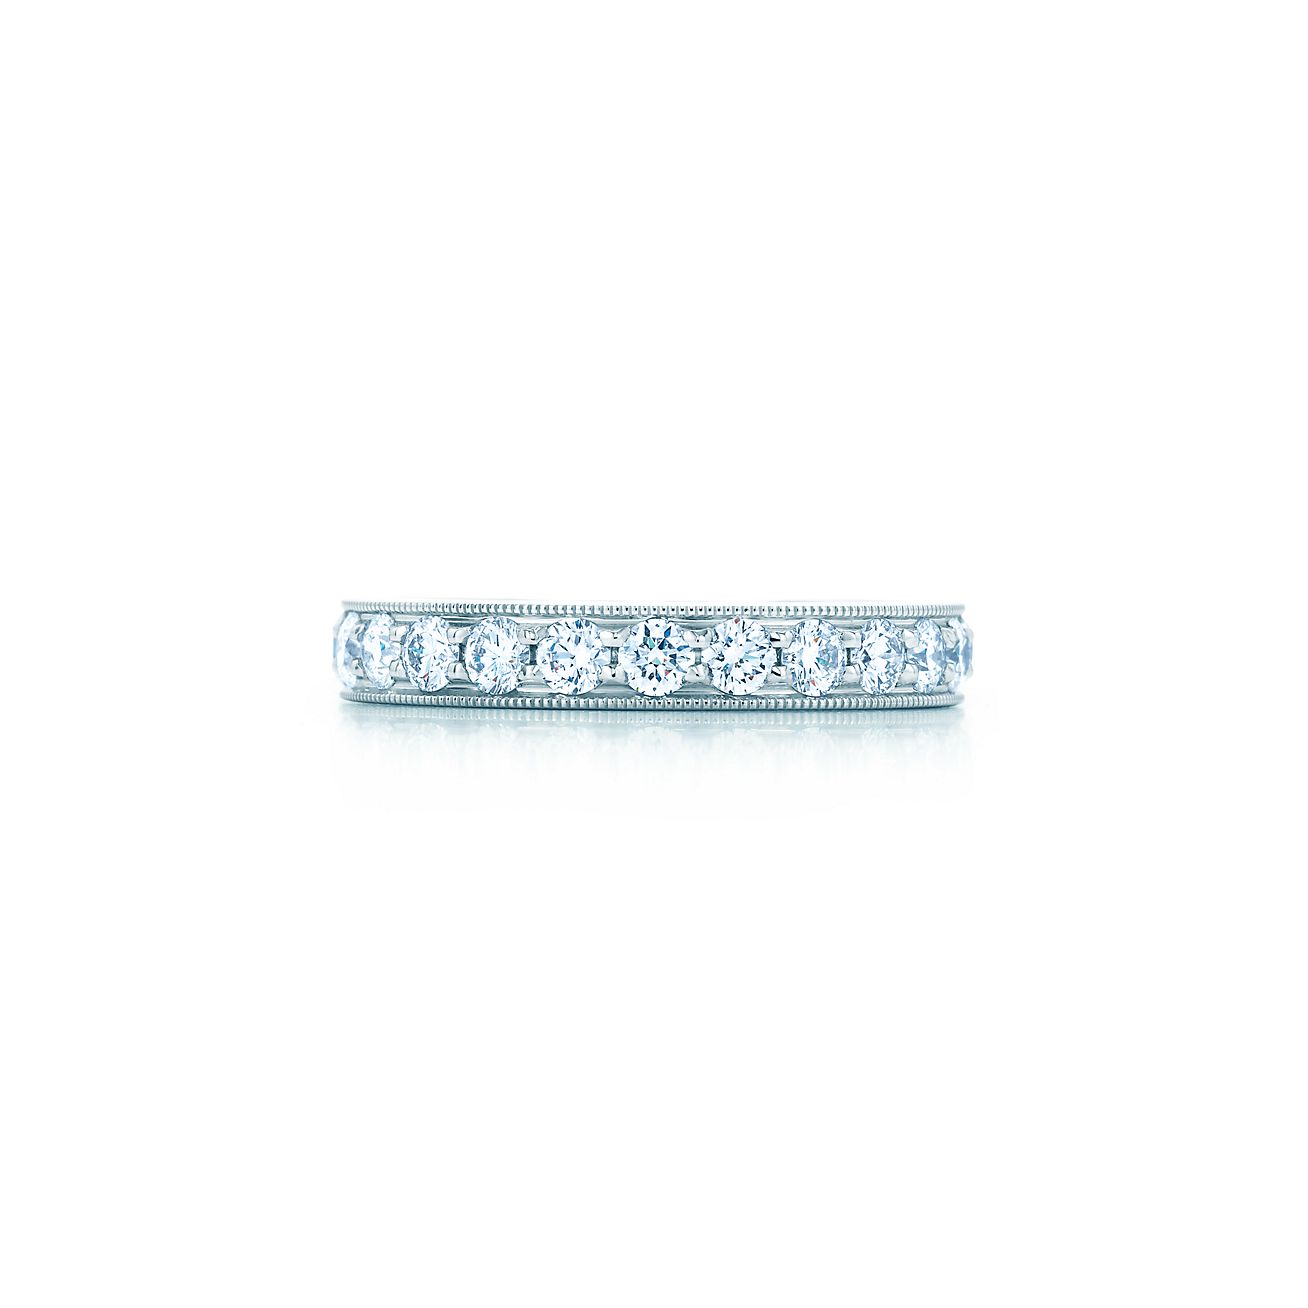 Tiffany Legacy Collection band ring in 